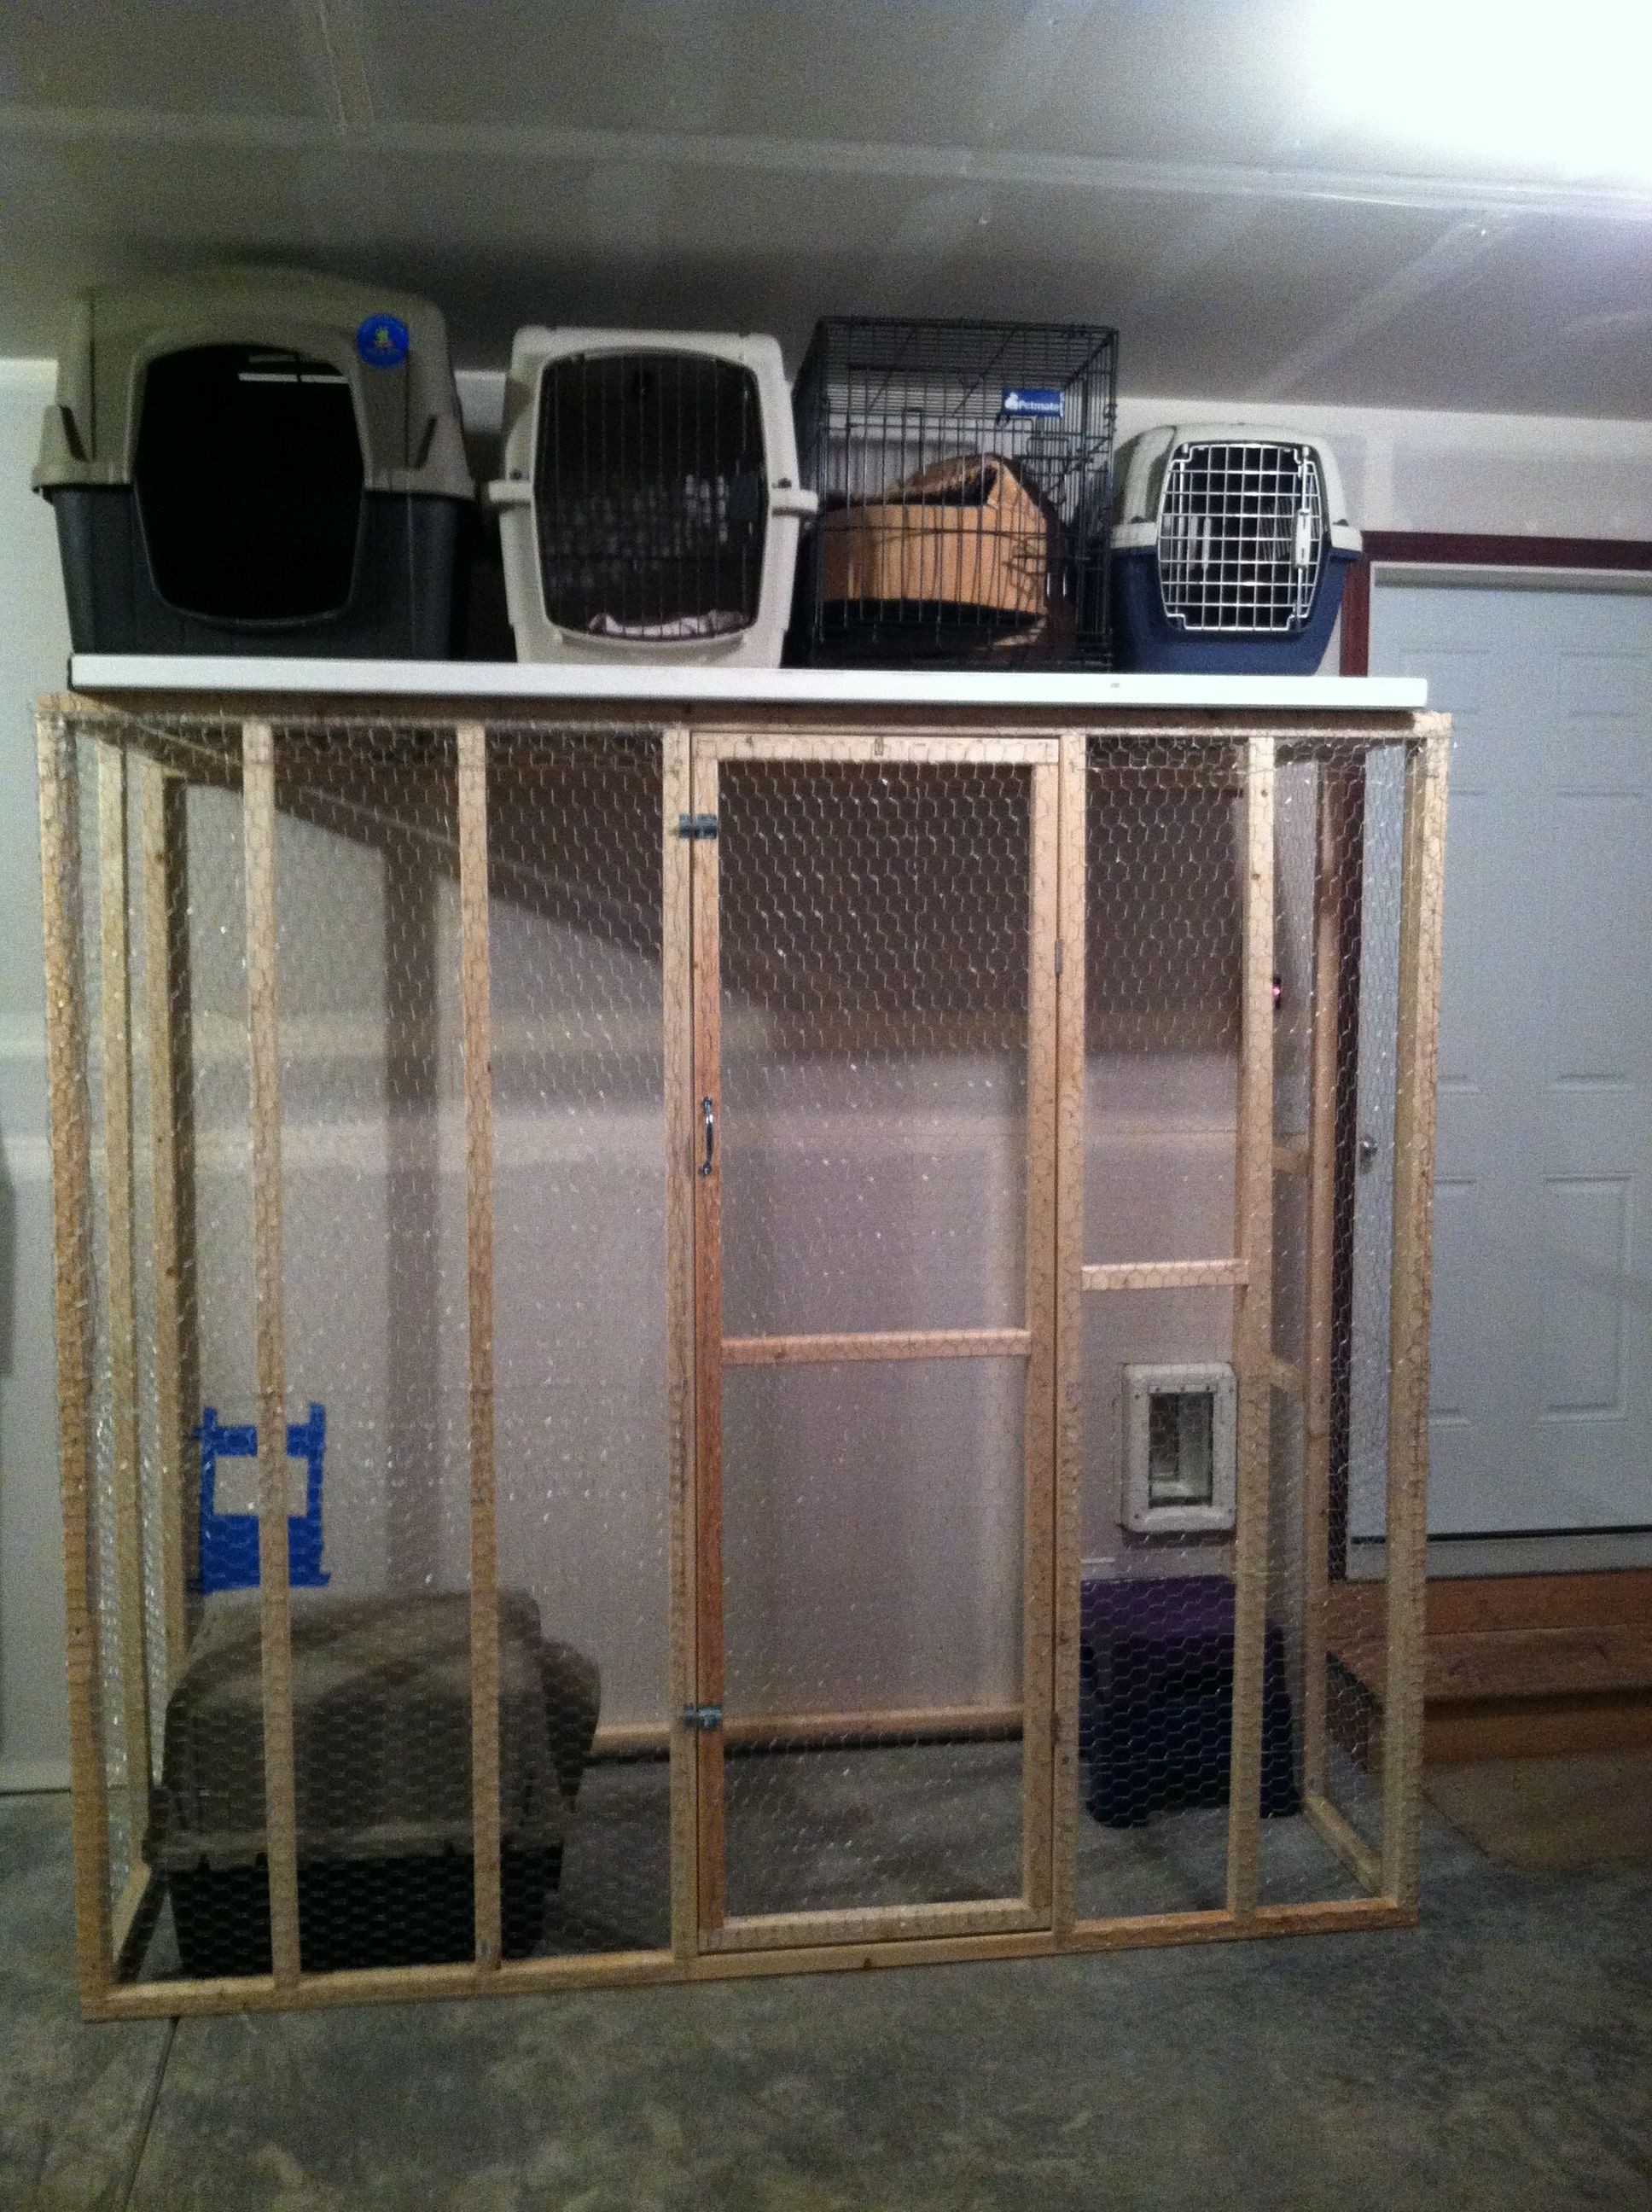 cat crate with litter box